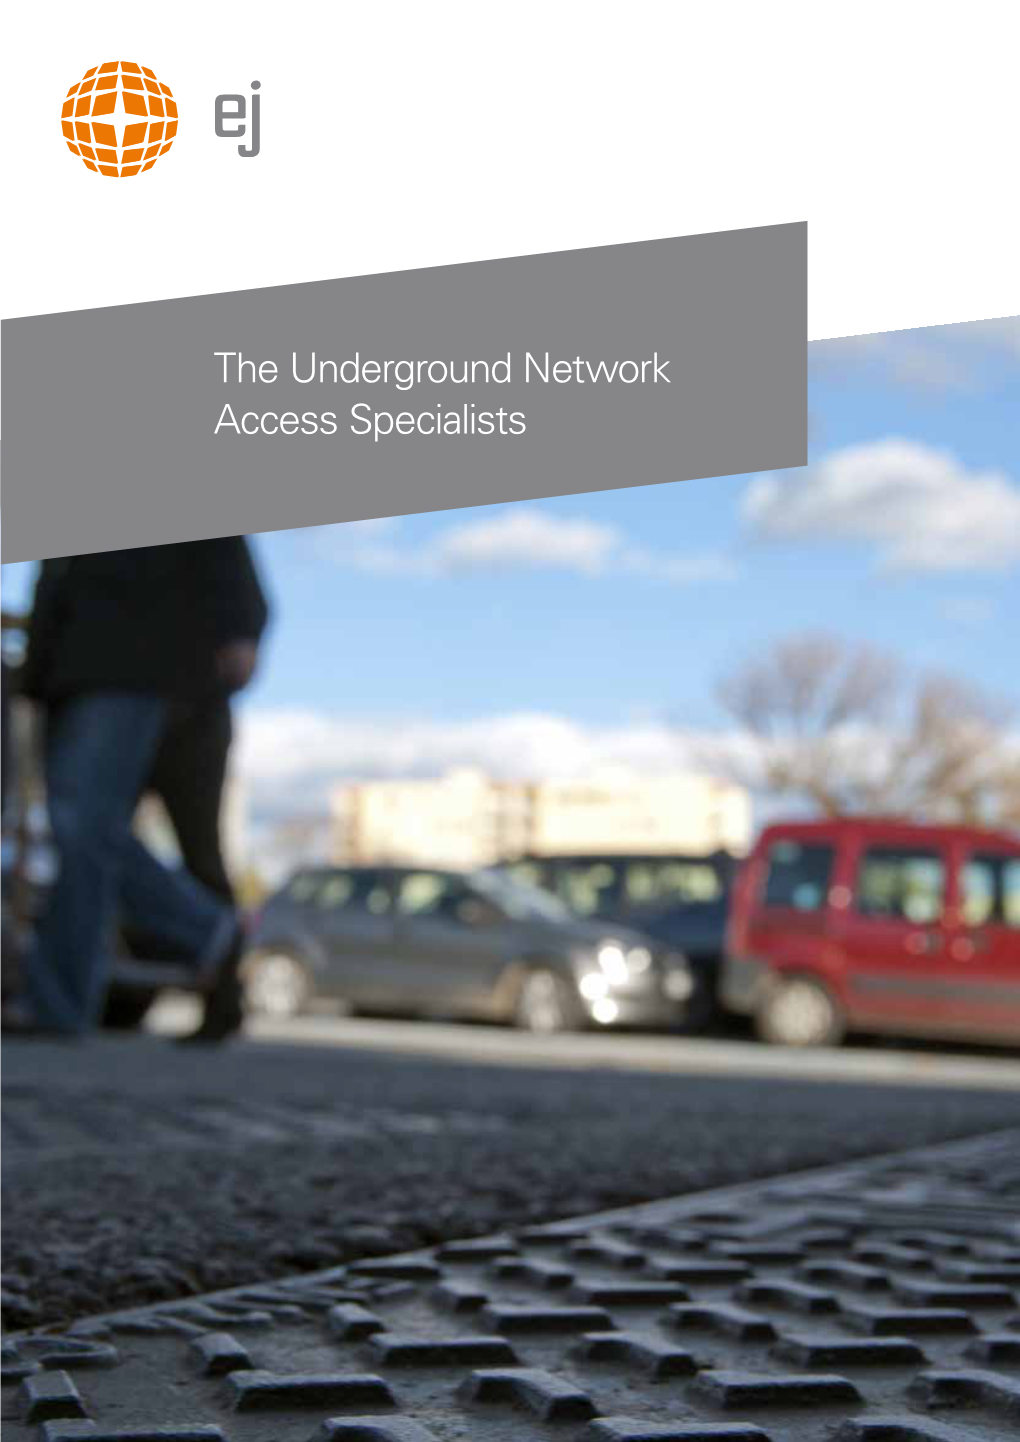 The Underground Network Access Specialists